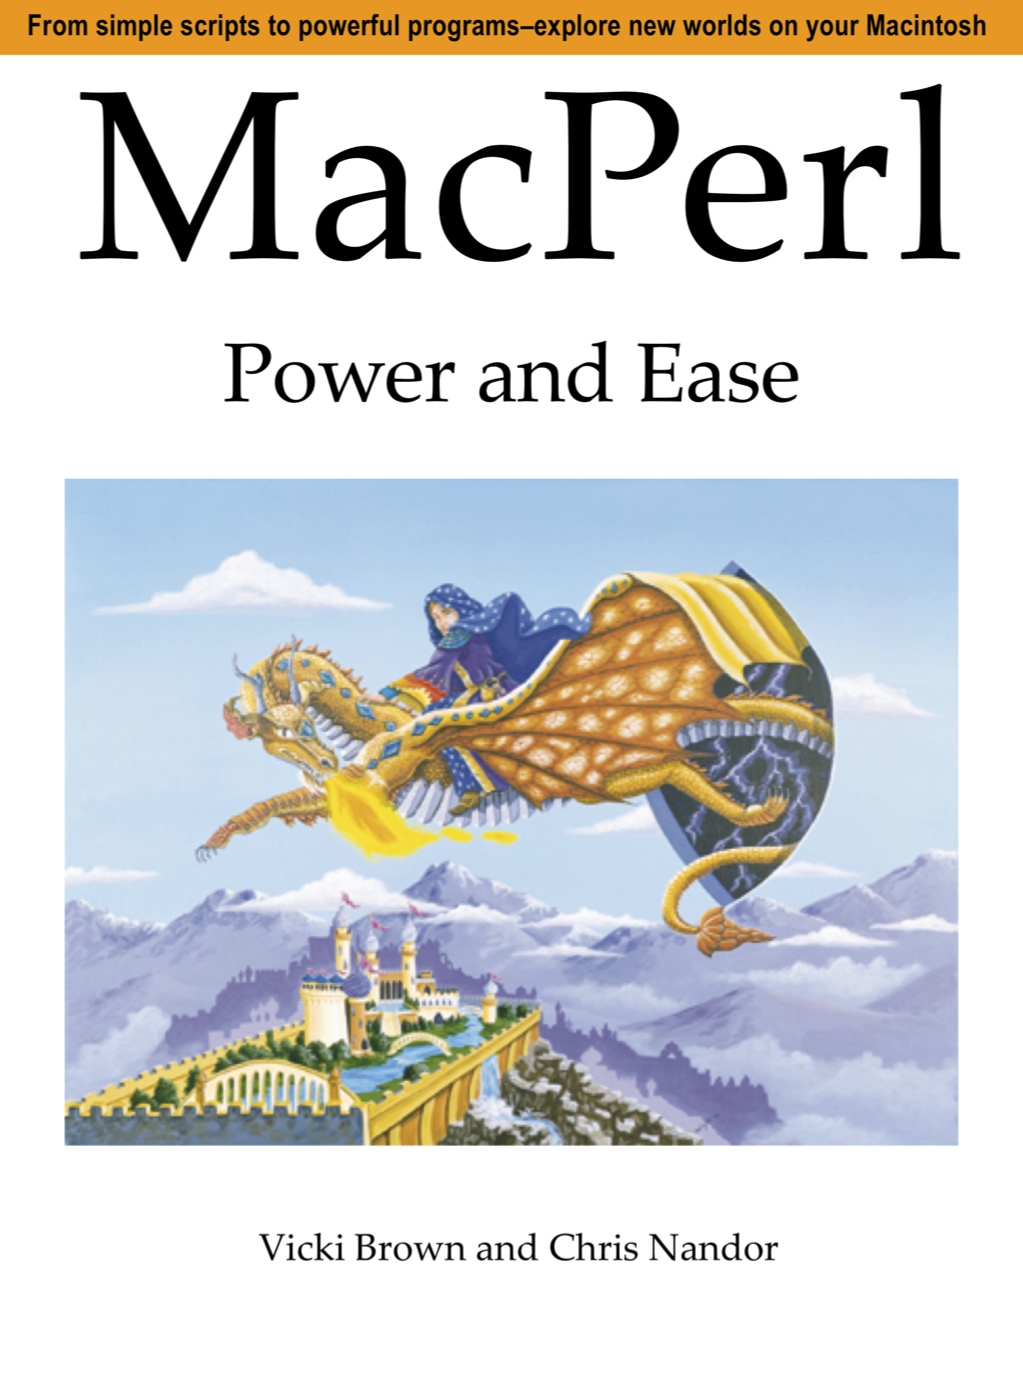 MacPerl Power and Ease 1998